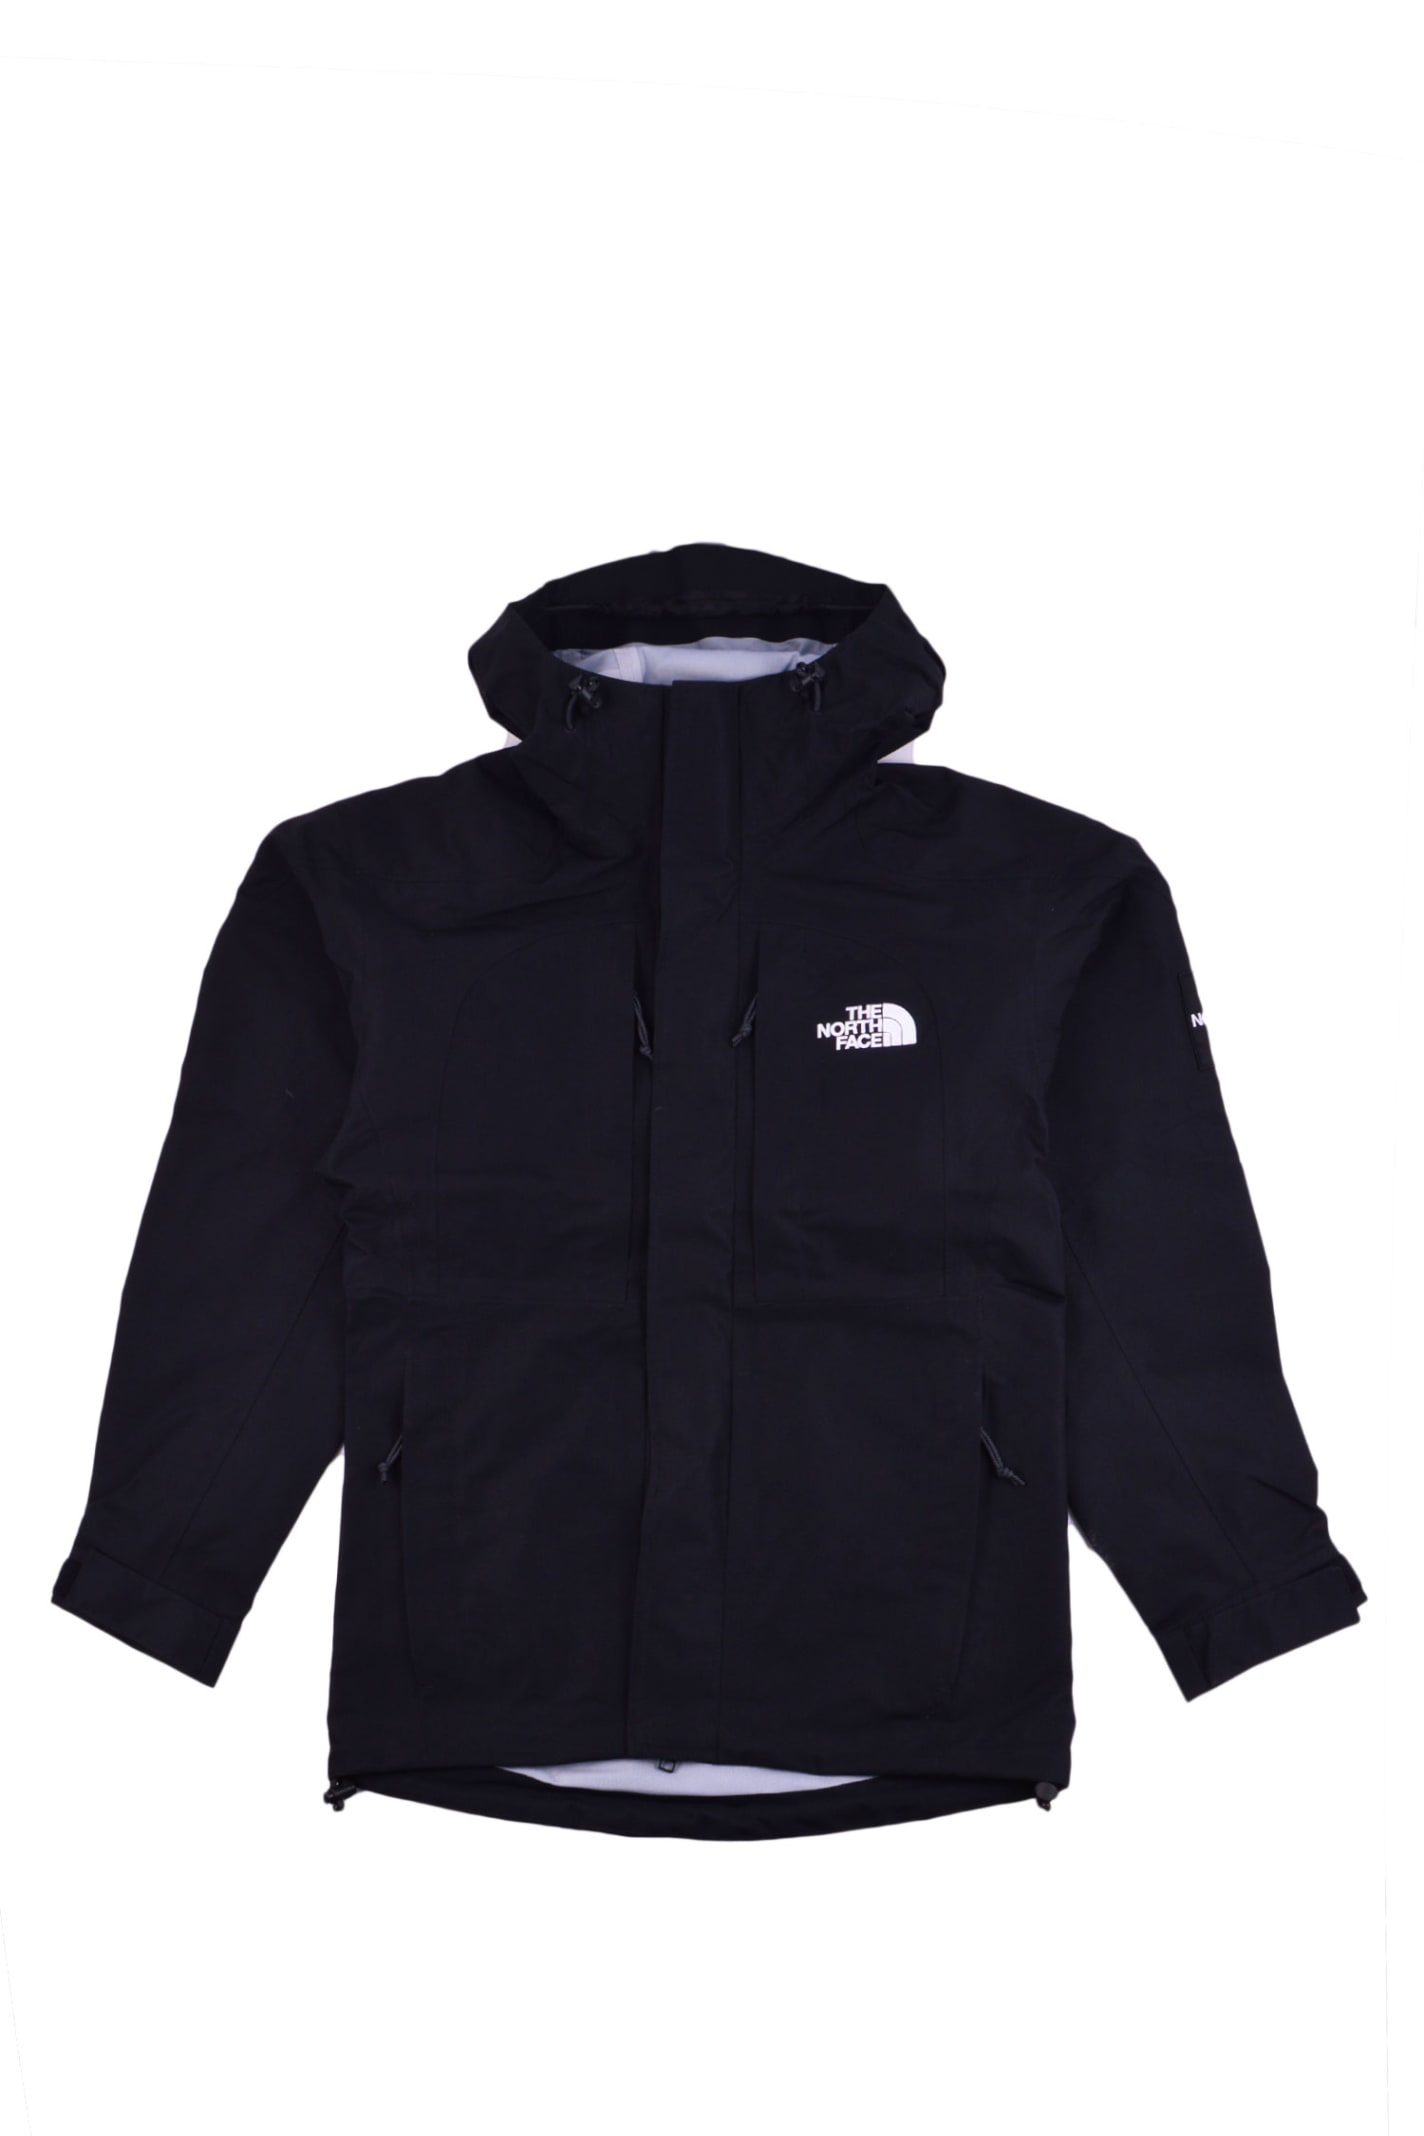 THE NORTH FACE THE NORTH FACE MOUNTAIN 2000 JACKET